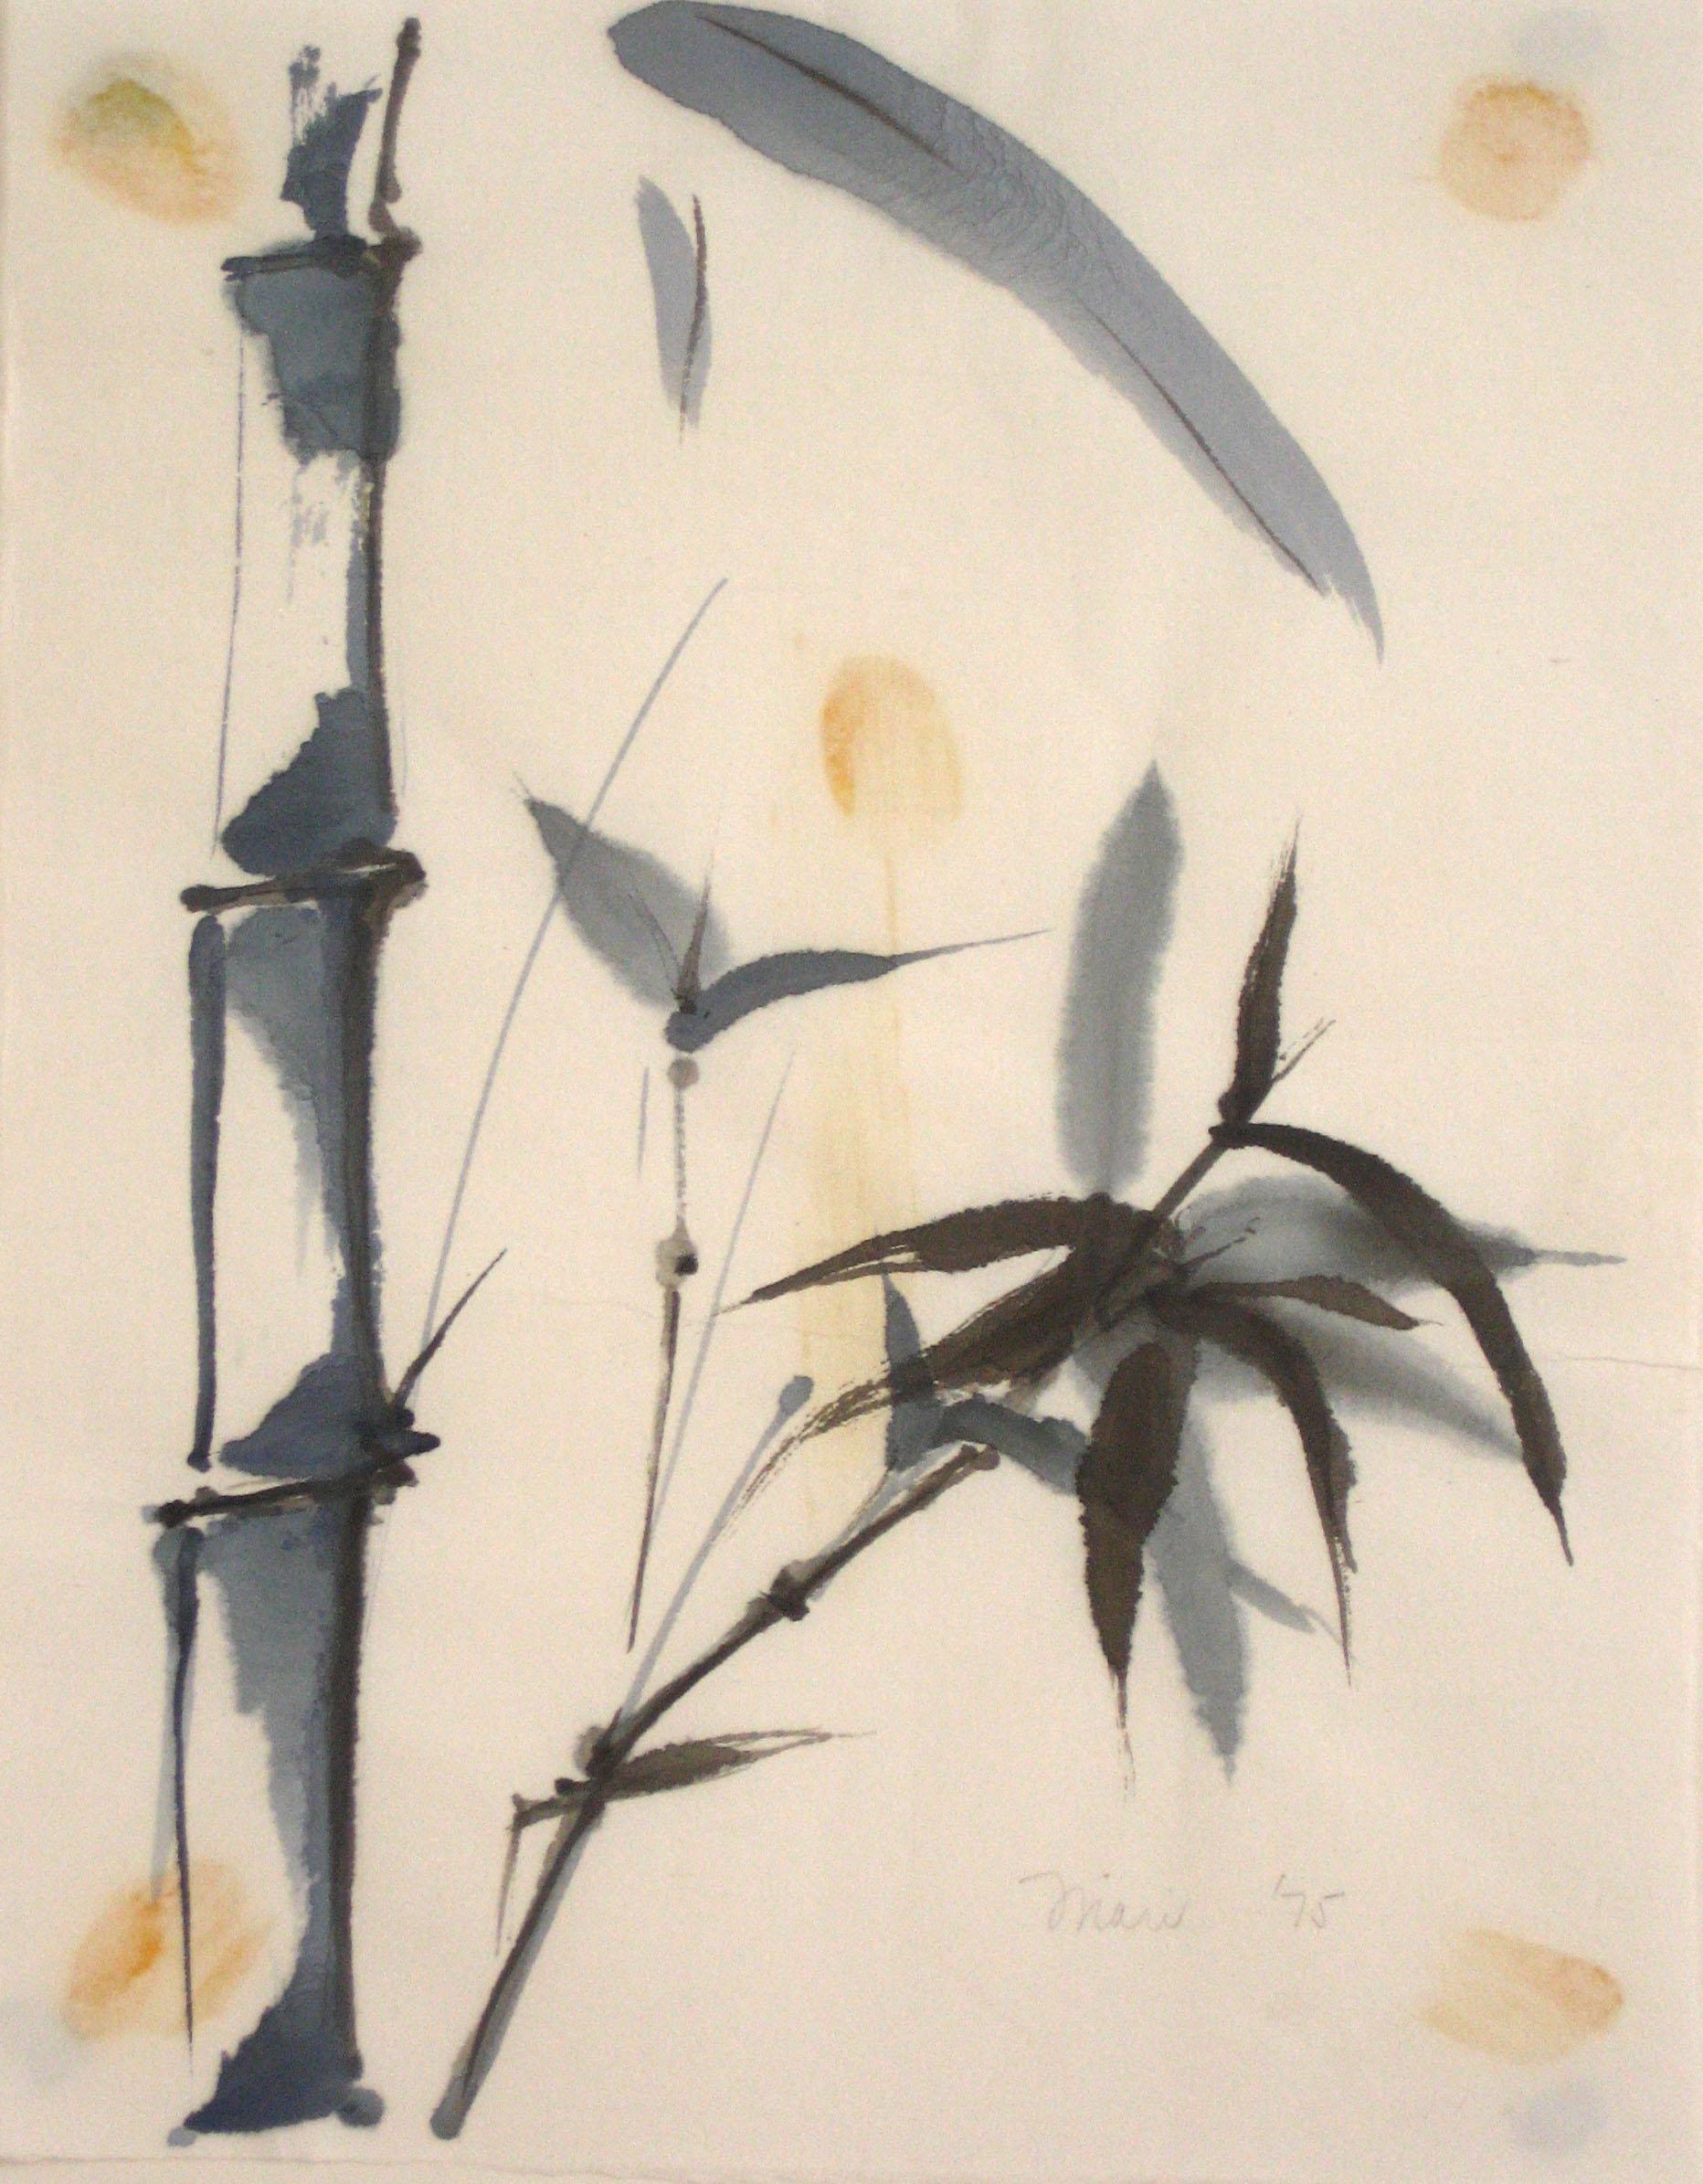 Unknown Landscape Art - 1975 Ink Wash and Watercolor Painting of Bamboo on Paper